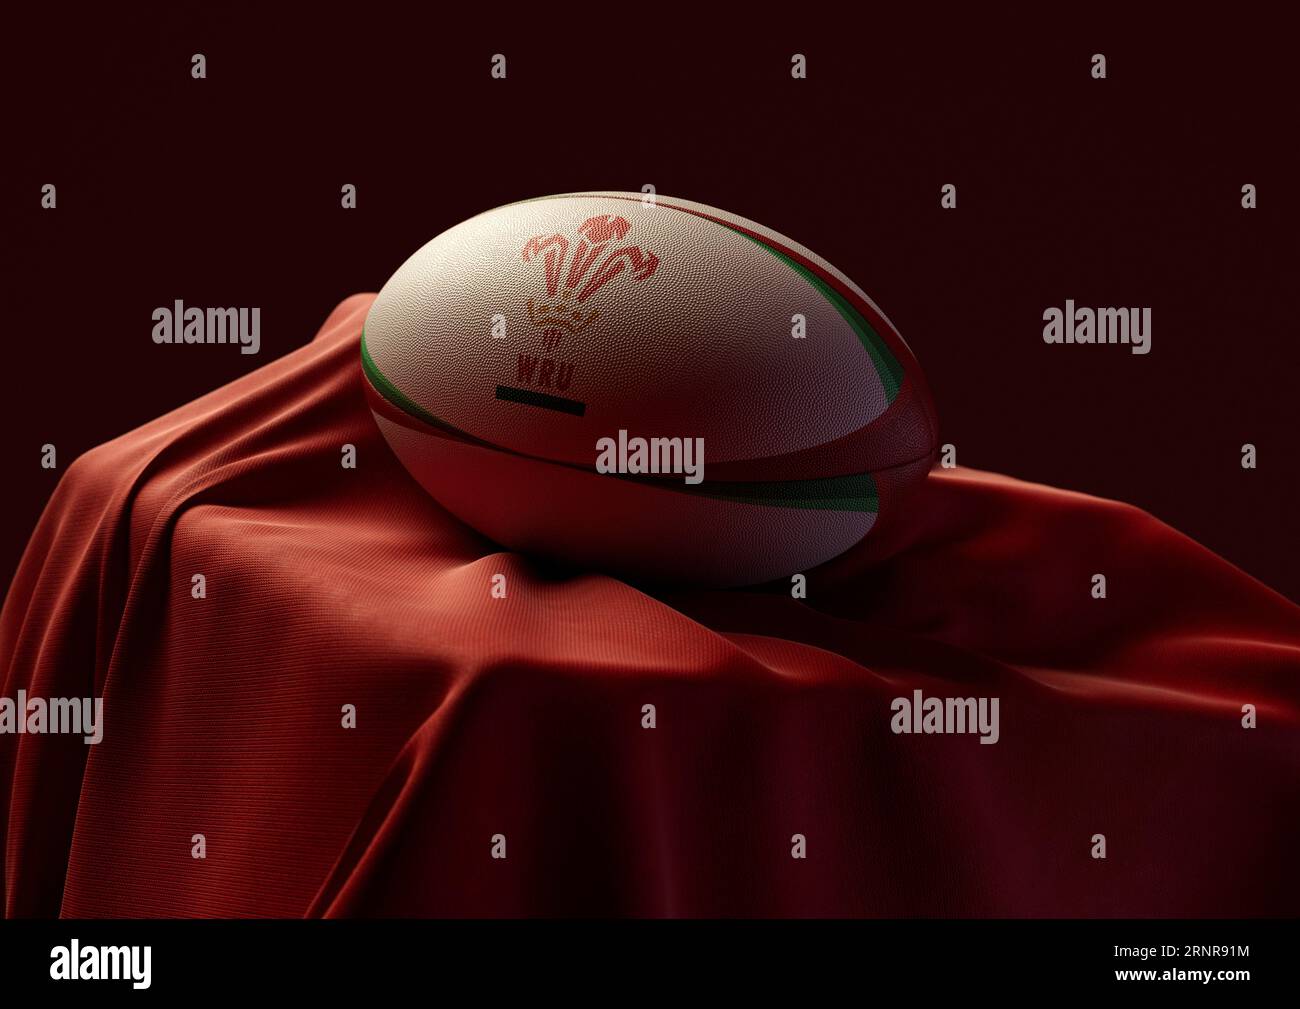 September 2, 2023 - Bristol, United Kingdom: A 3D render of a rugby ball imprinted with the Wales rugby logo resting on a draped red fabric Stock Photo